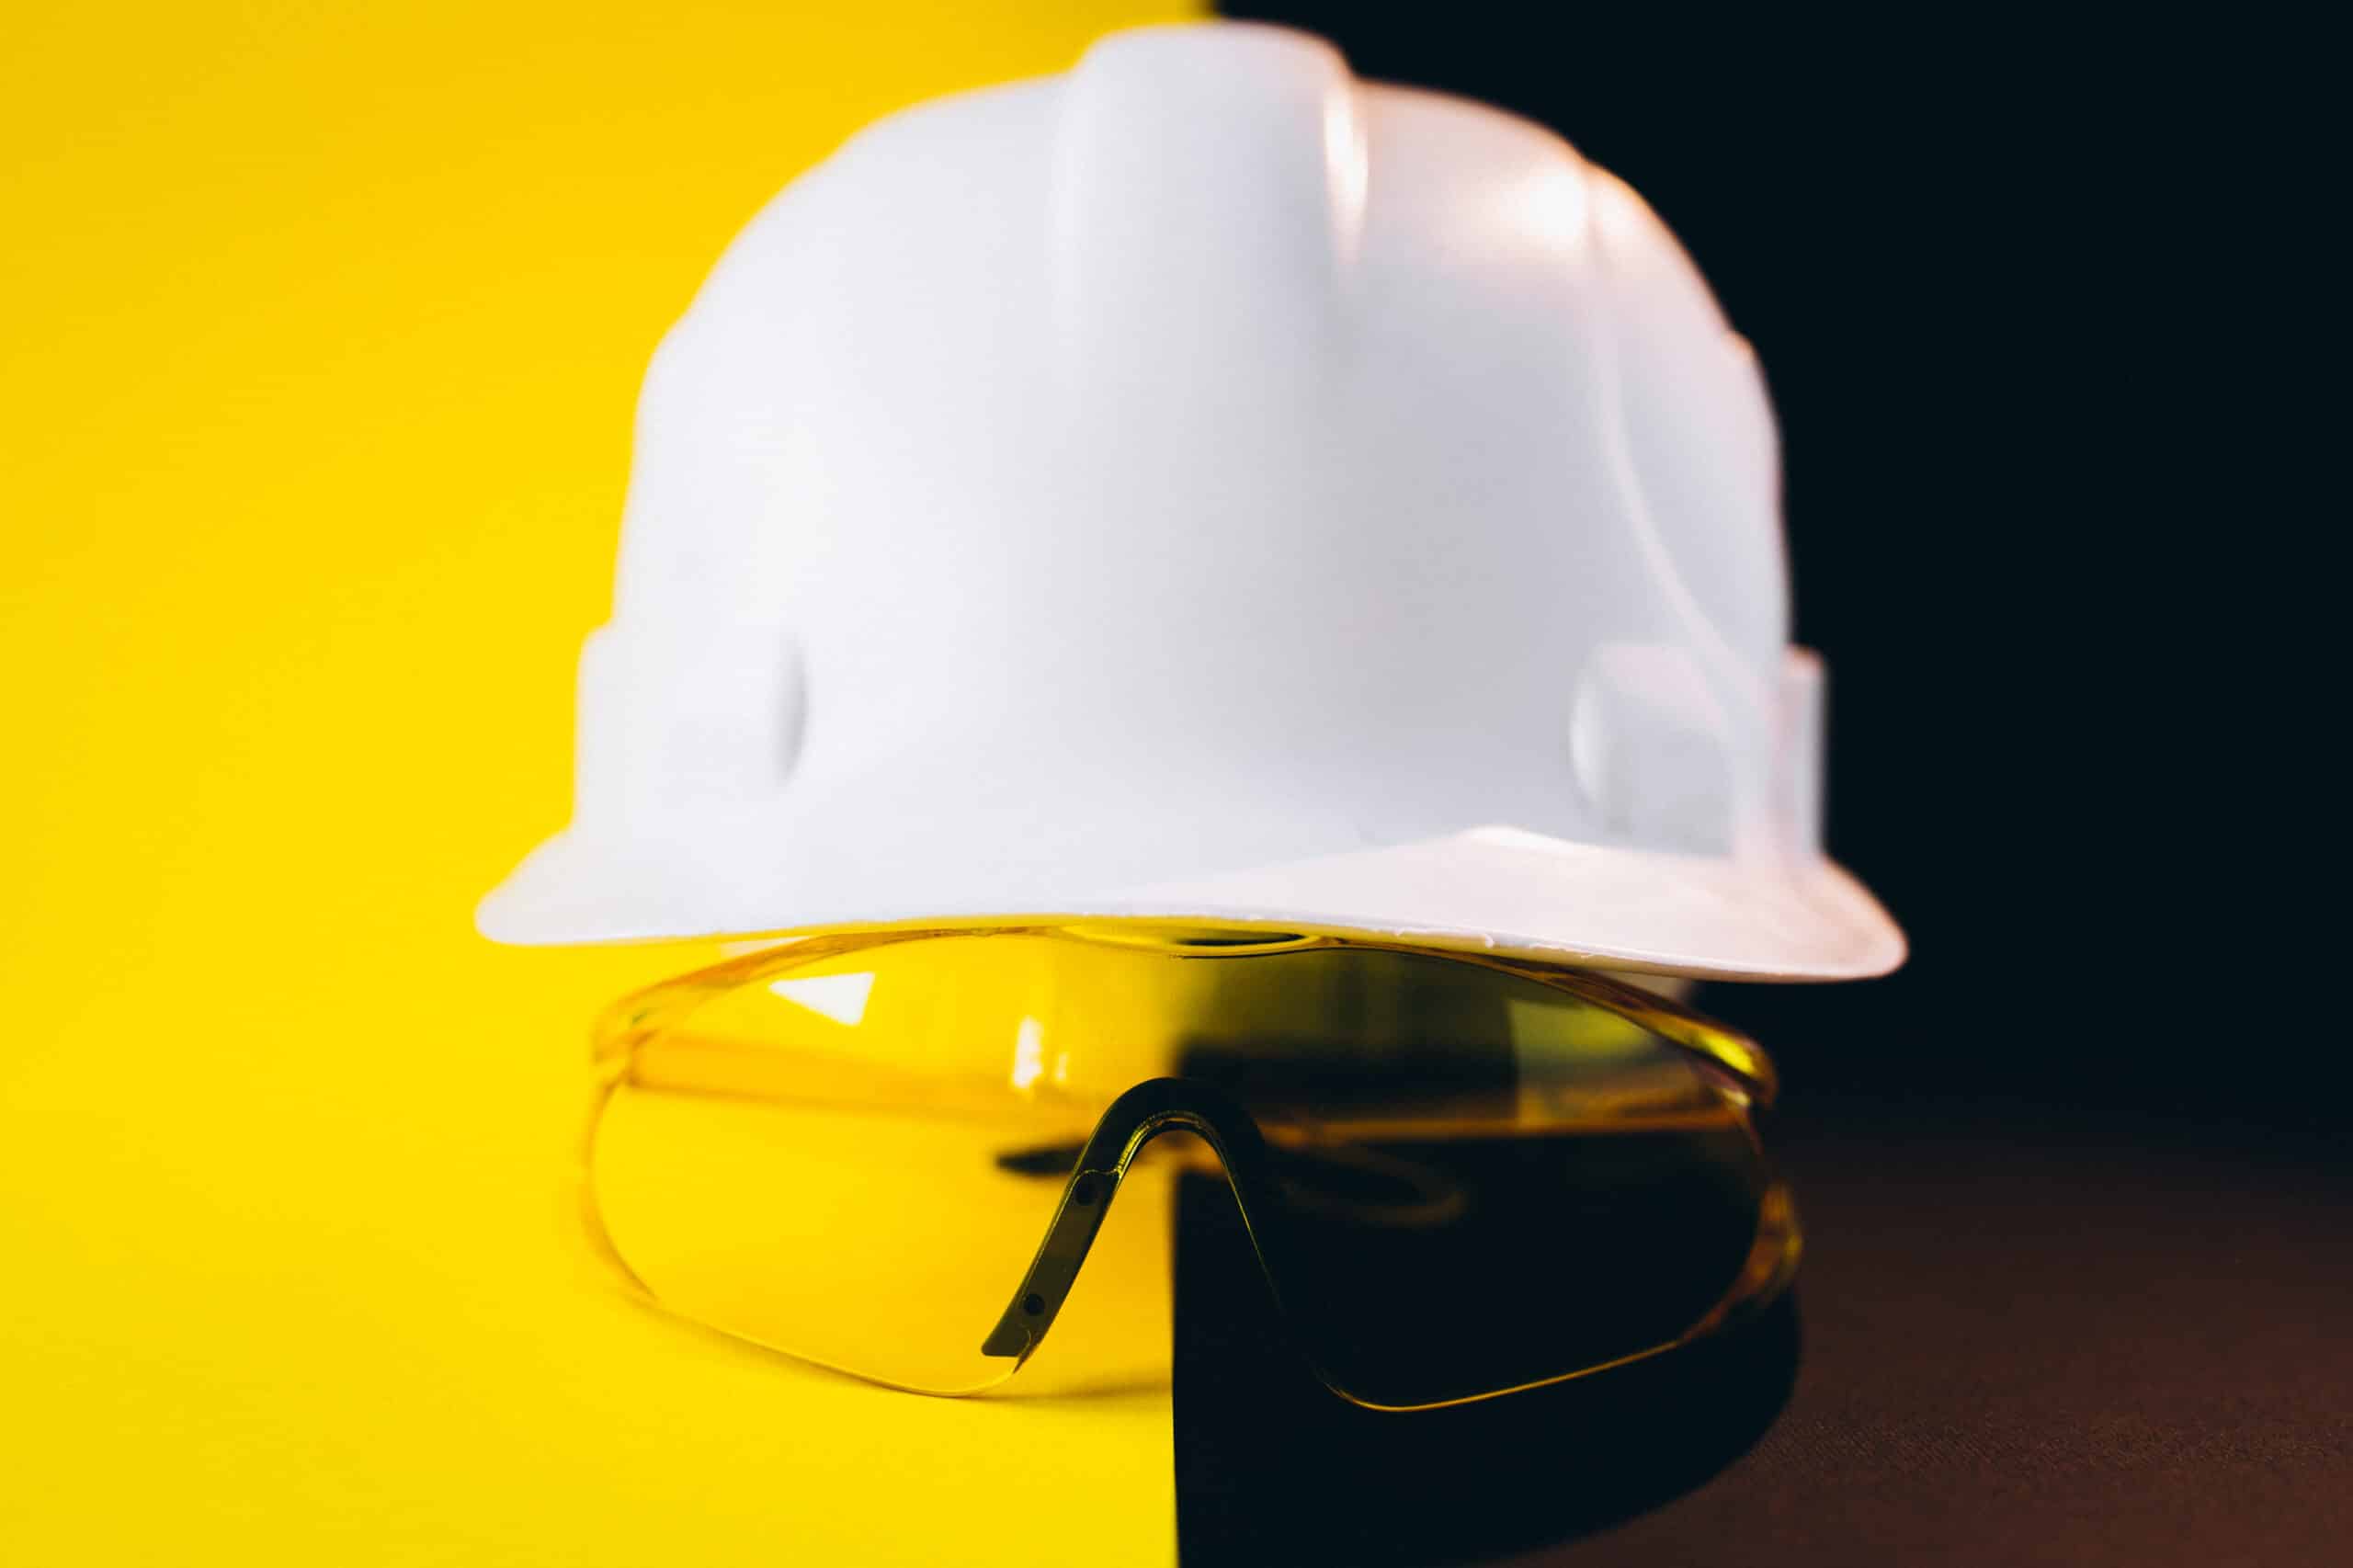 White hard hat with protection eyeglasses isolated on a black and yellow background